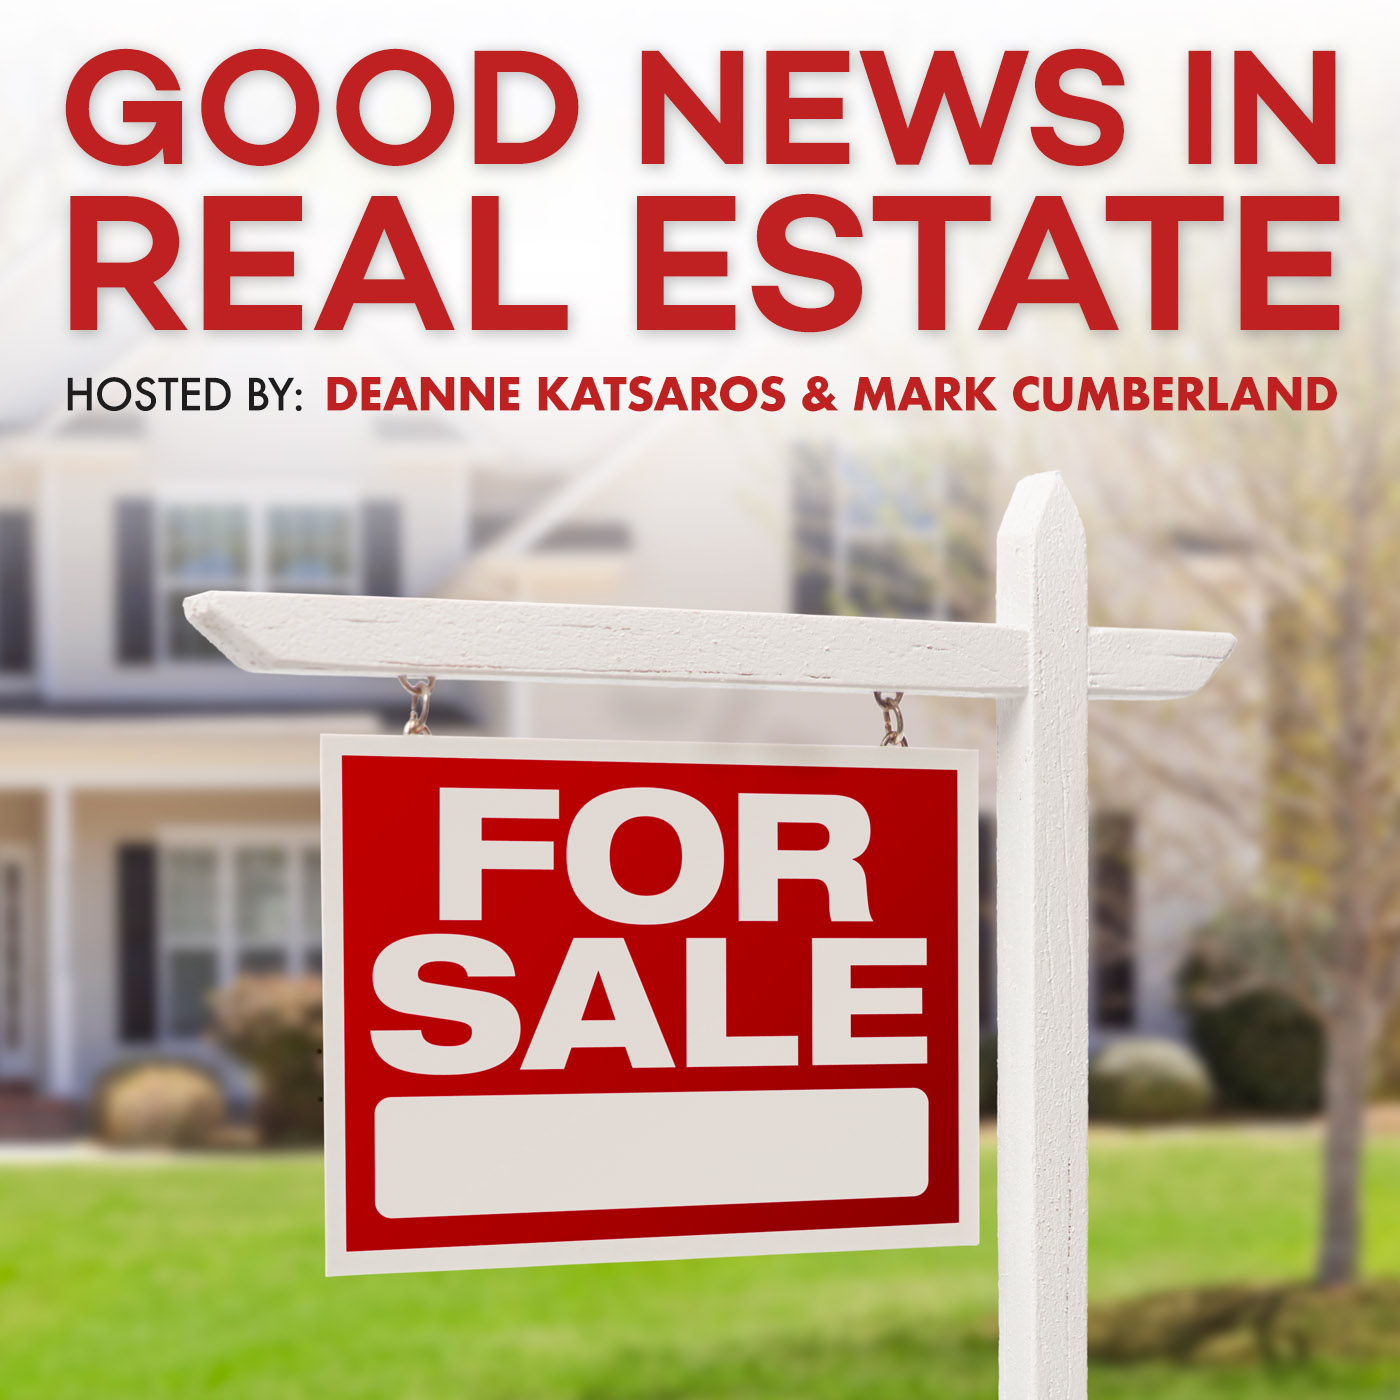 August 30, 2020 | Good News In Real Estate